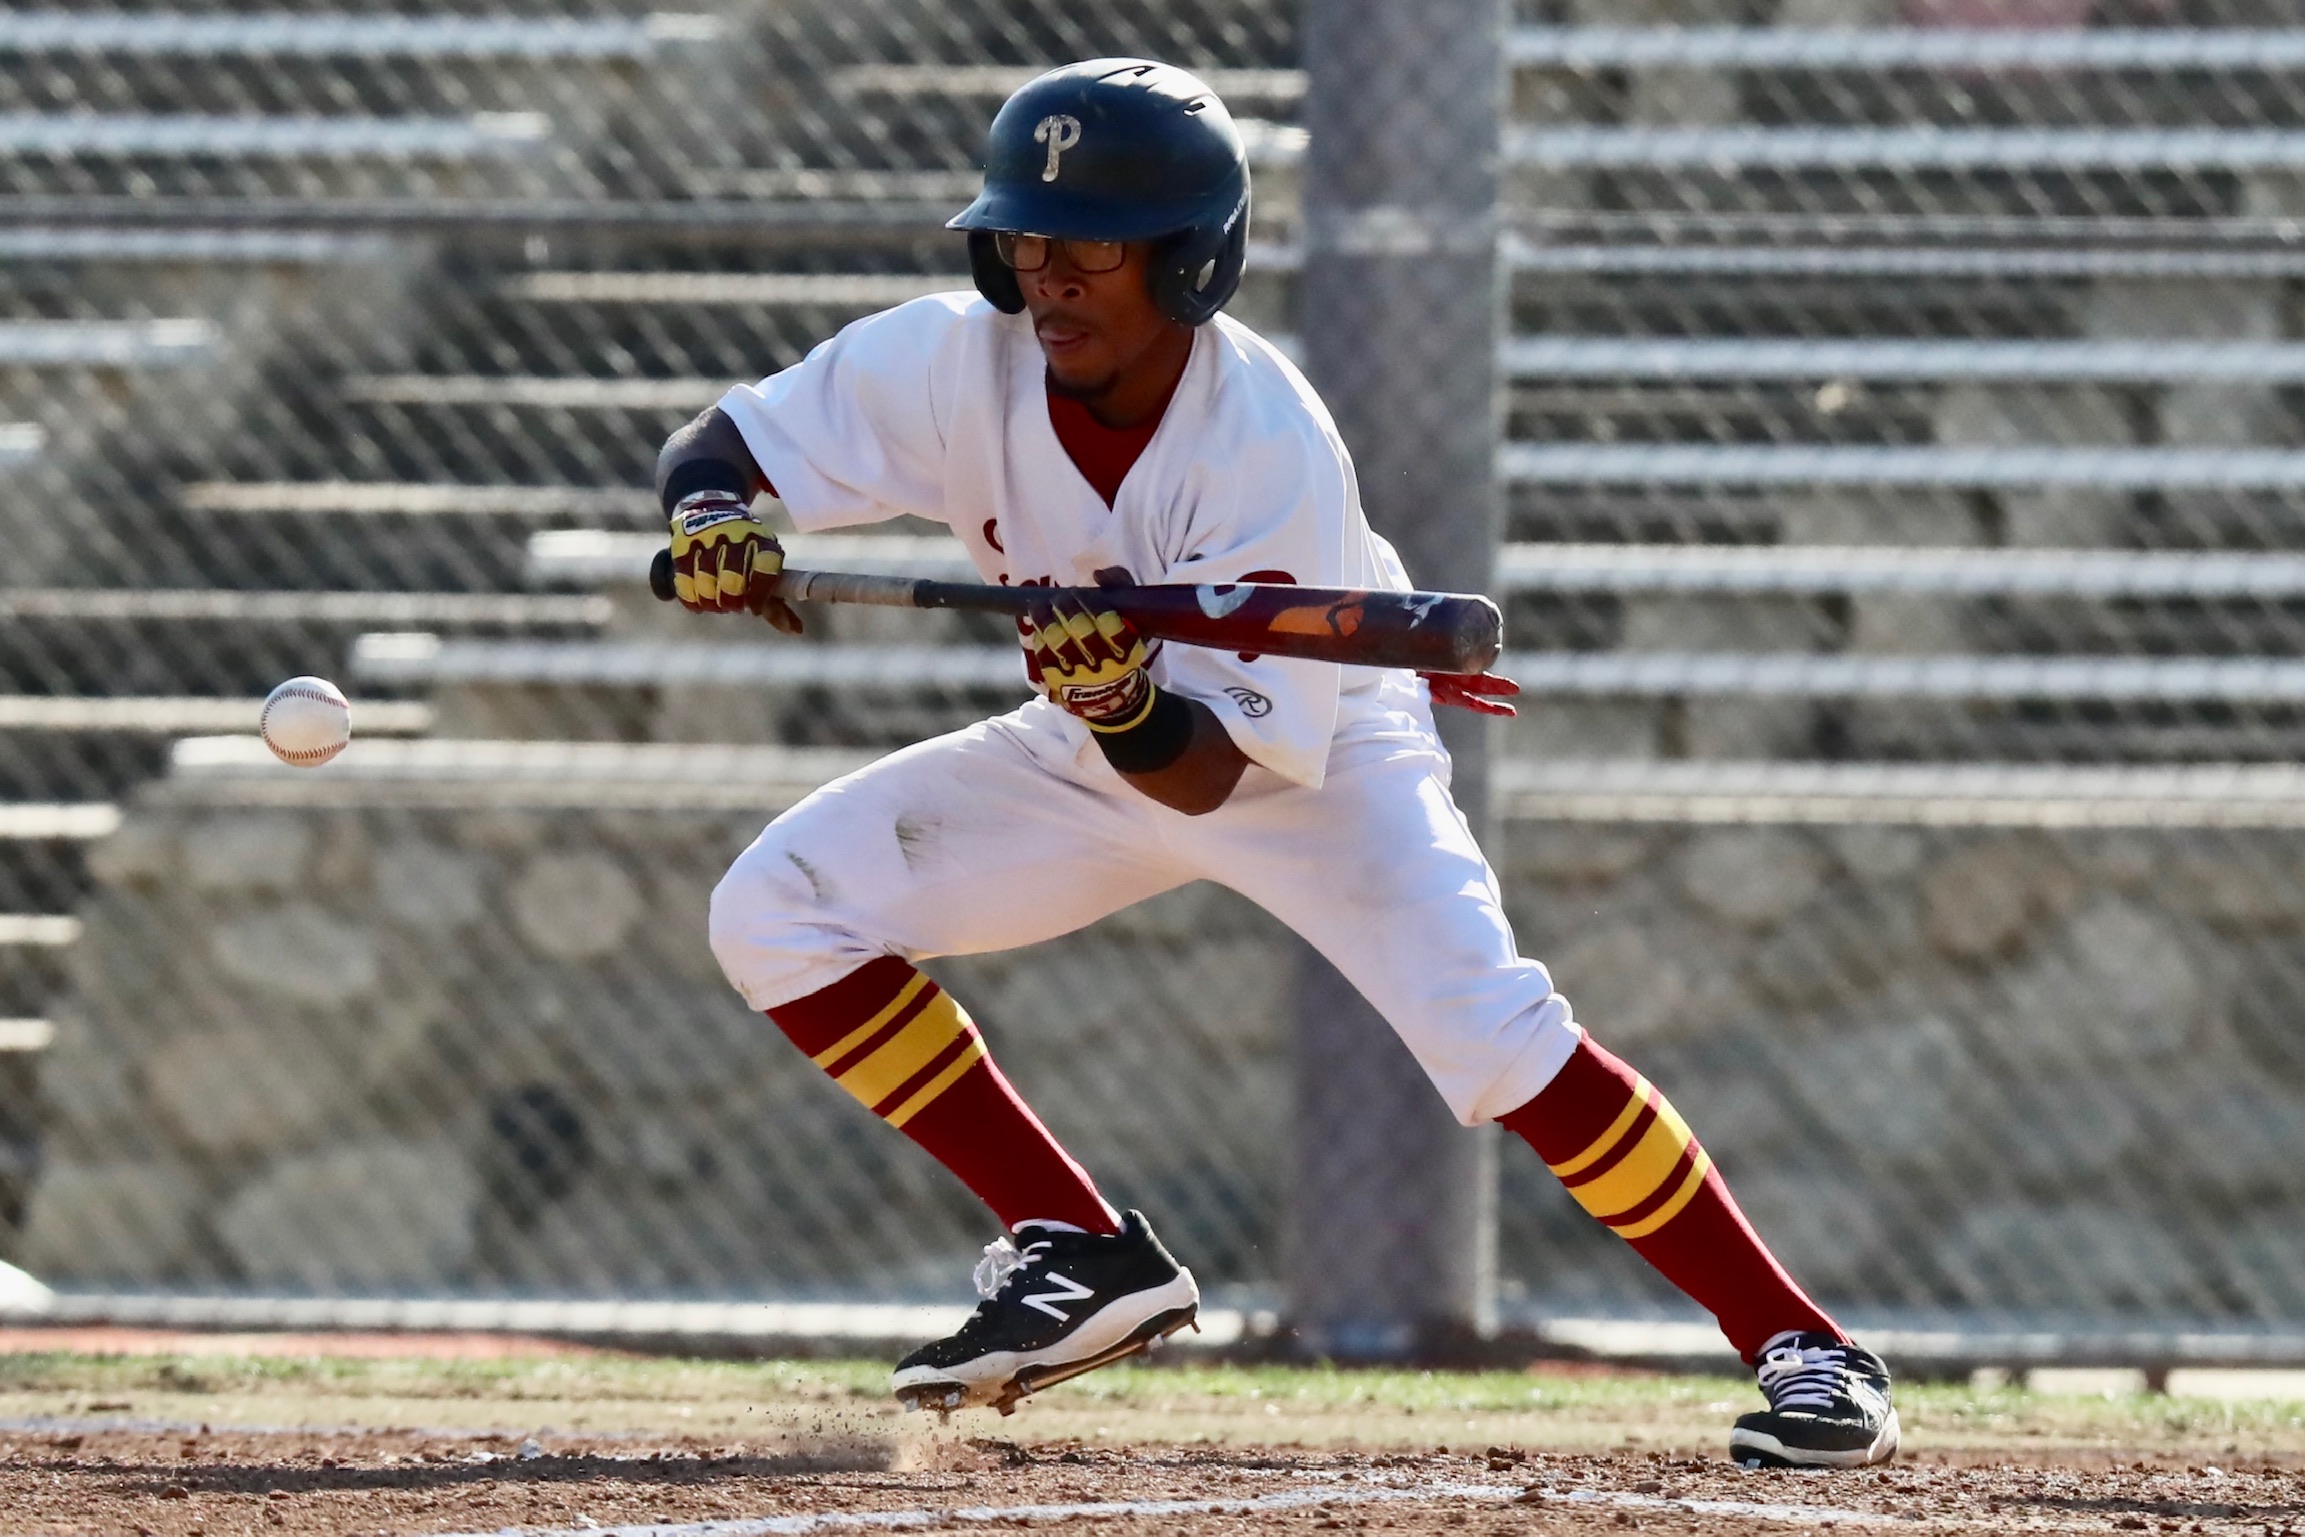 Aryonis Harrison, a returning sophomore from the 2020 team, is the team's starting leftfielder (photo by Michael Watkins, Athletics).